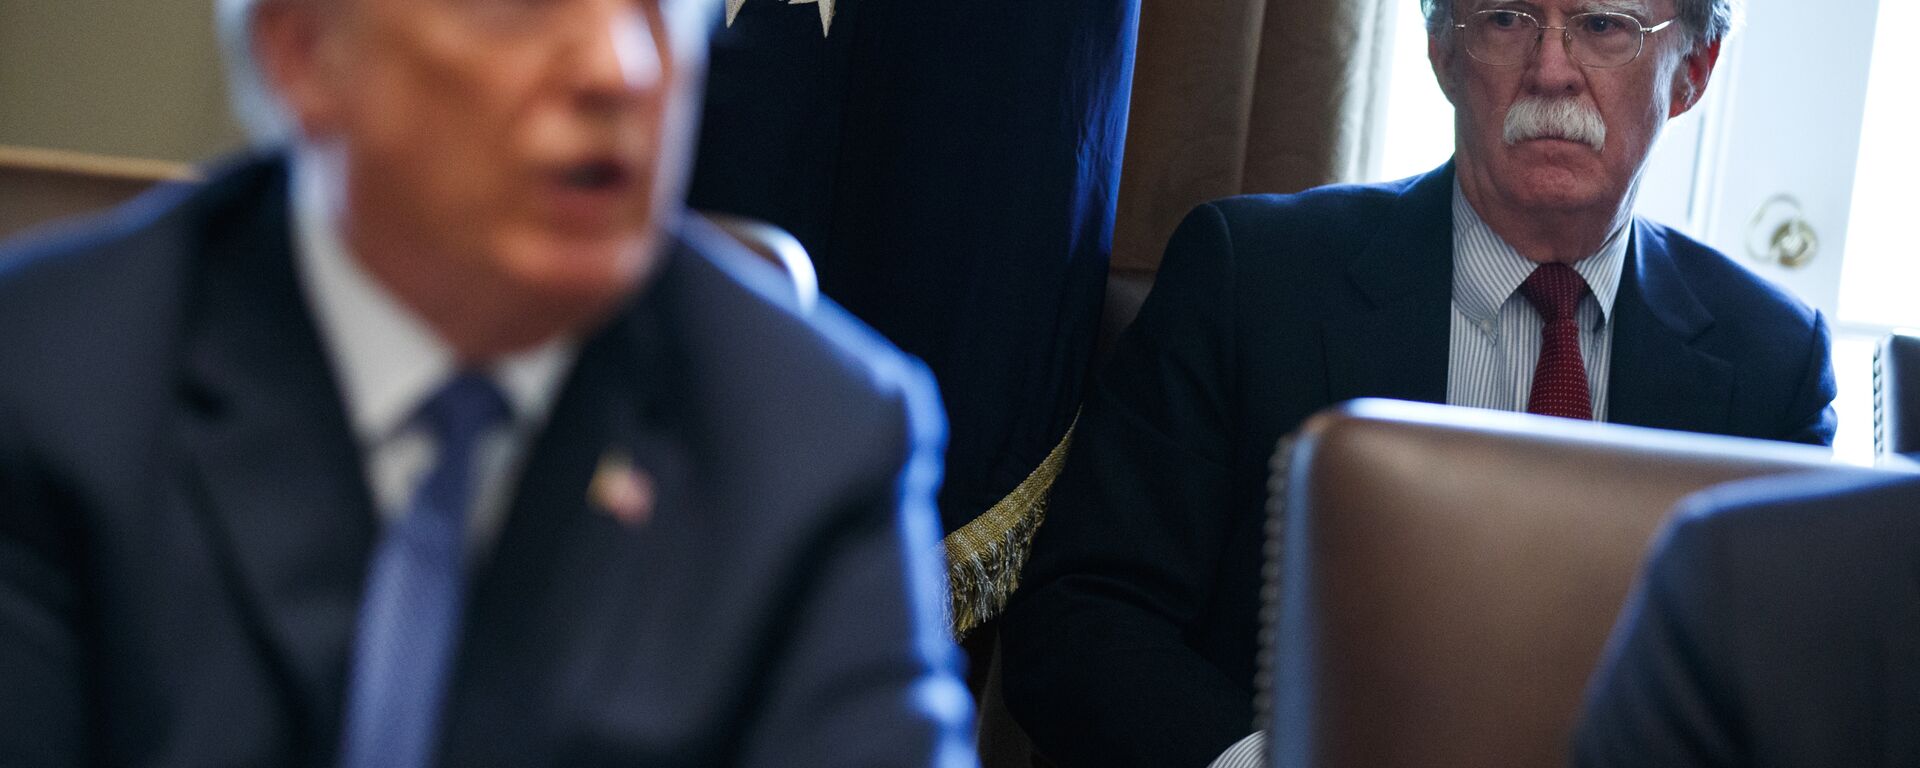 National security adviser John Bolton listens as President Donald Trump speaks during a cabinet meeting at the White House, Monday, April 9, 2018, in Washington - Sputnik International, 1920, 29.01.2020